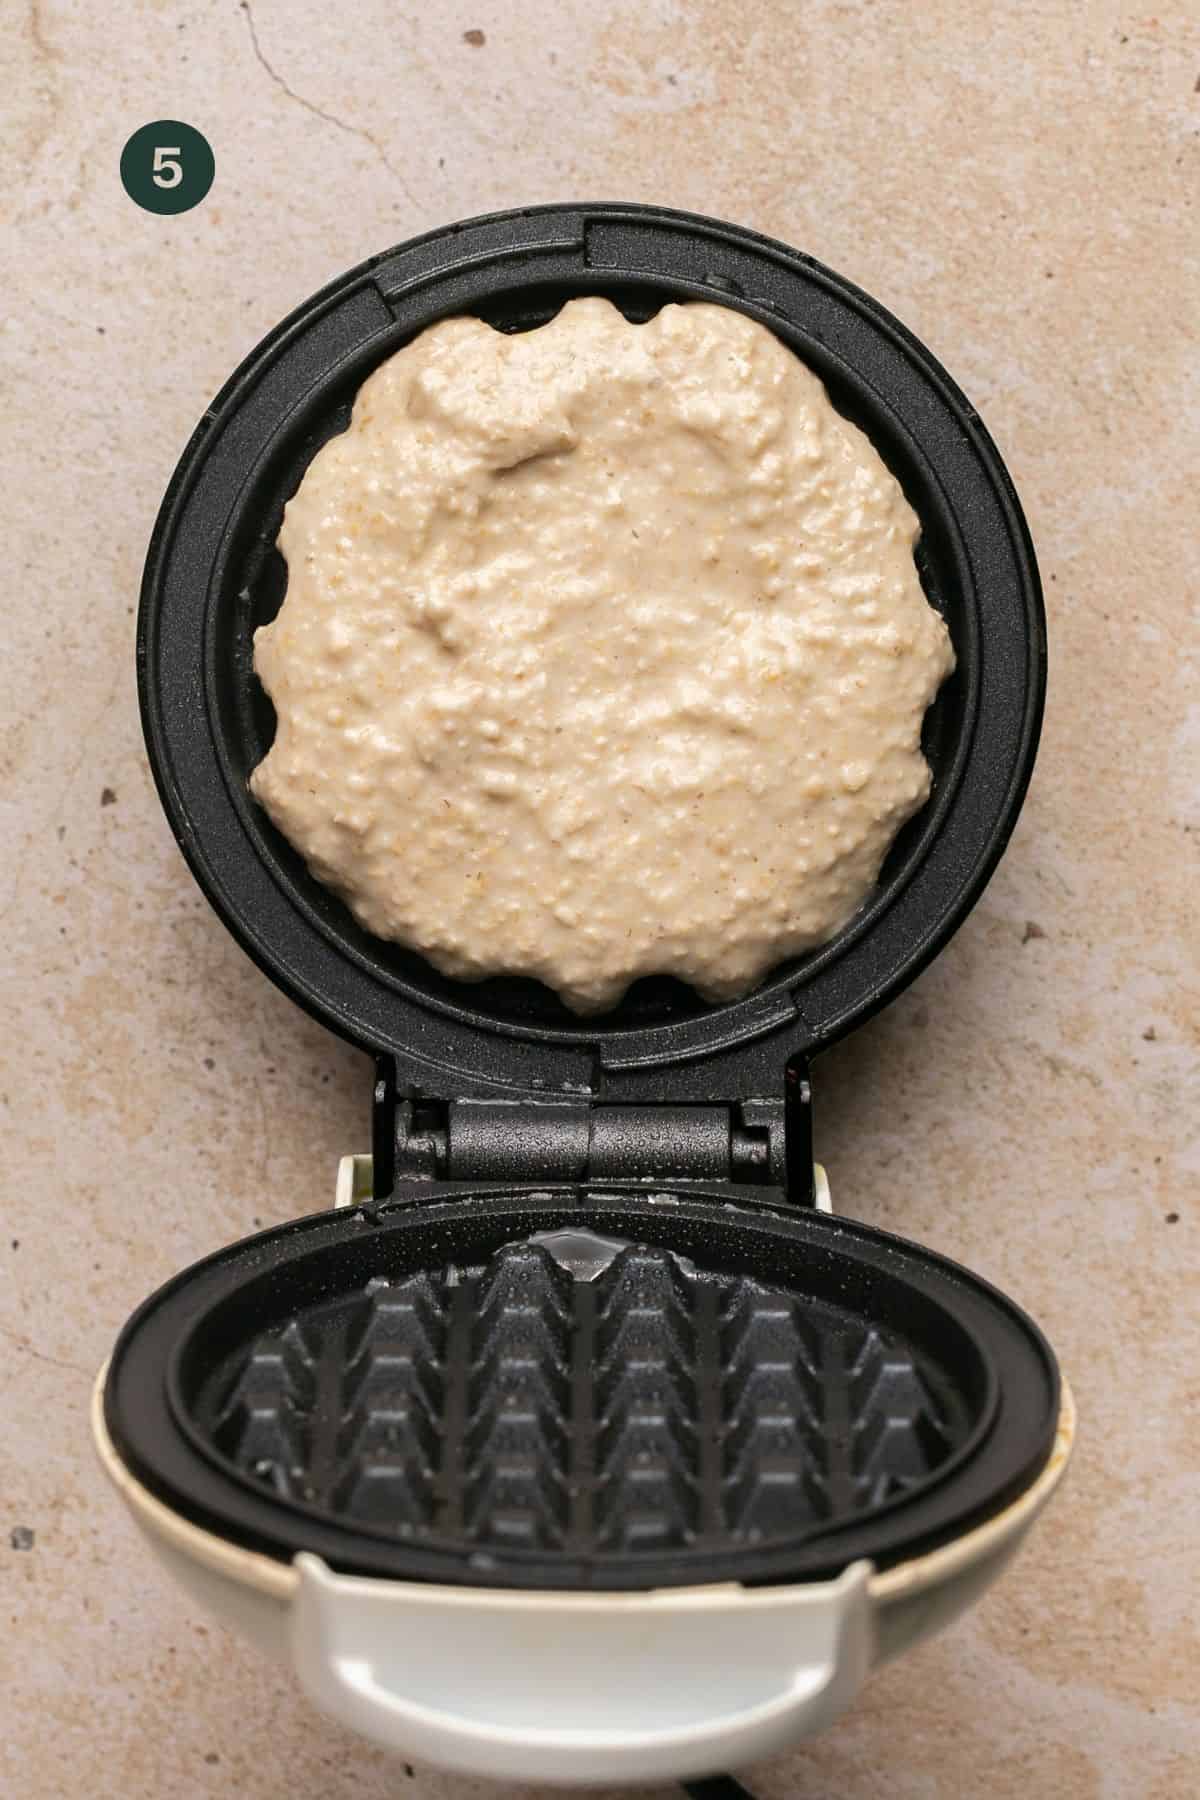 Batter added to a hot waffle maker.